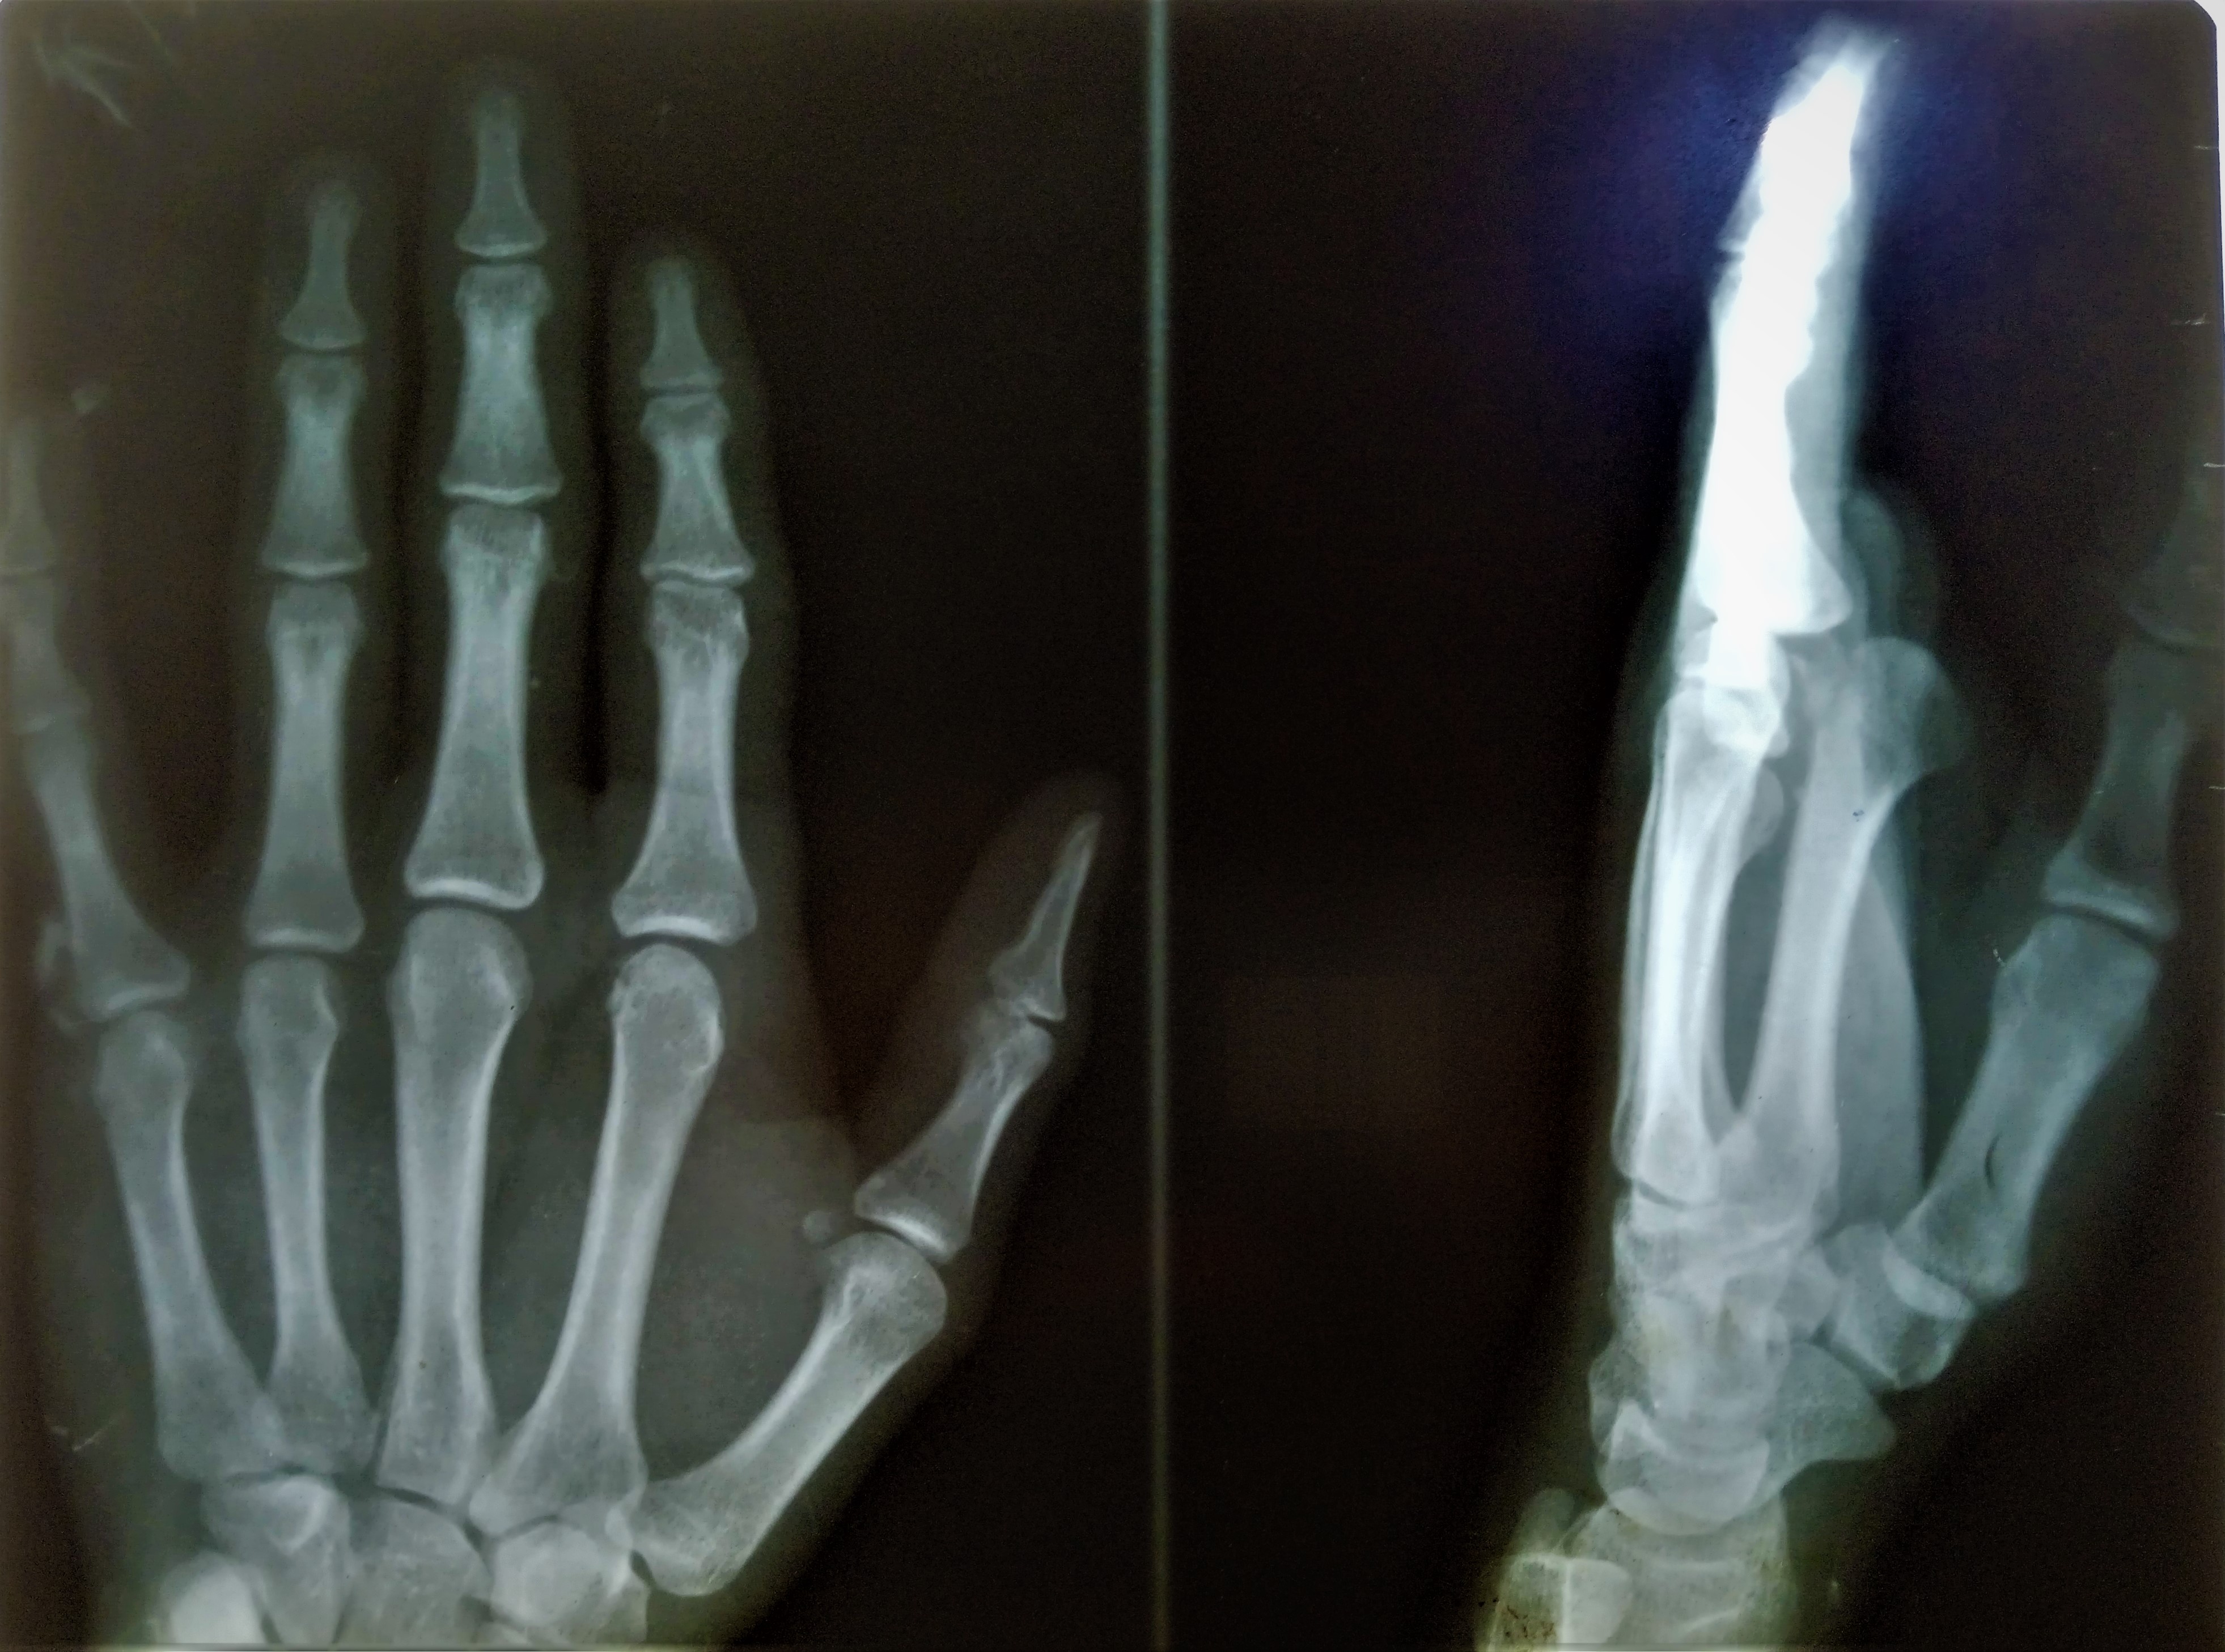 MCP Joint Dorsal Dislocation of Index Finger